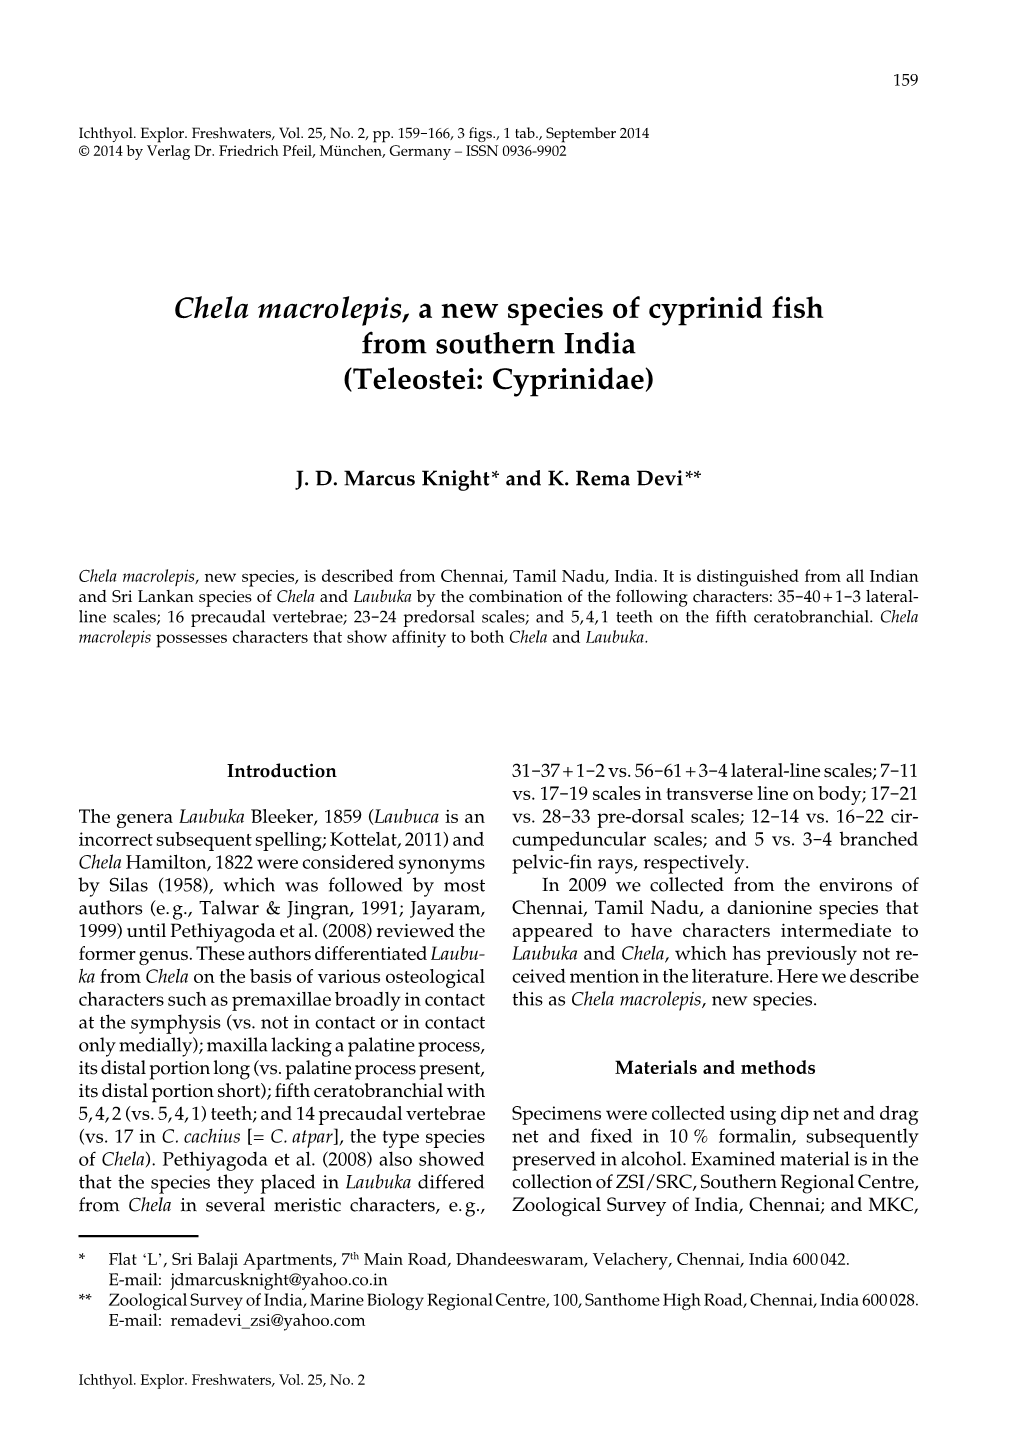 Chela Macrolepis, a New Species of Cyprinid Fish from Southern India (Teleostei: Cyprinidae)